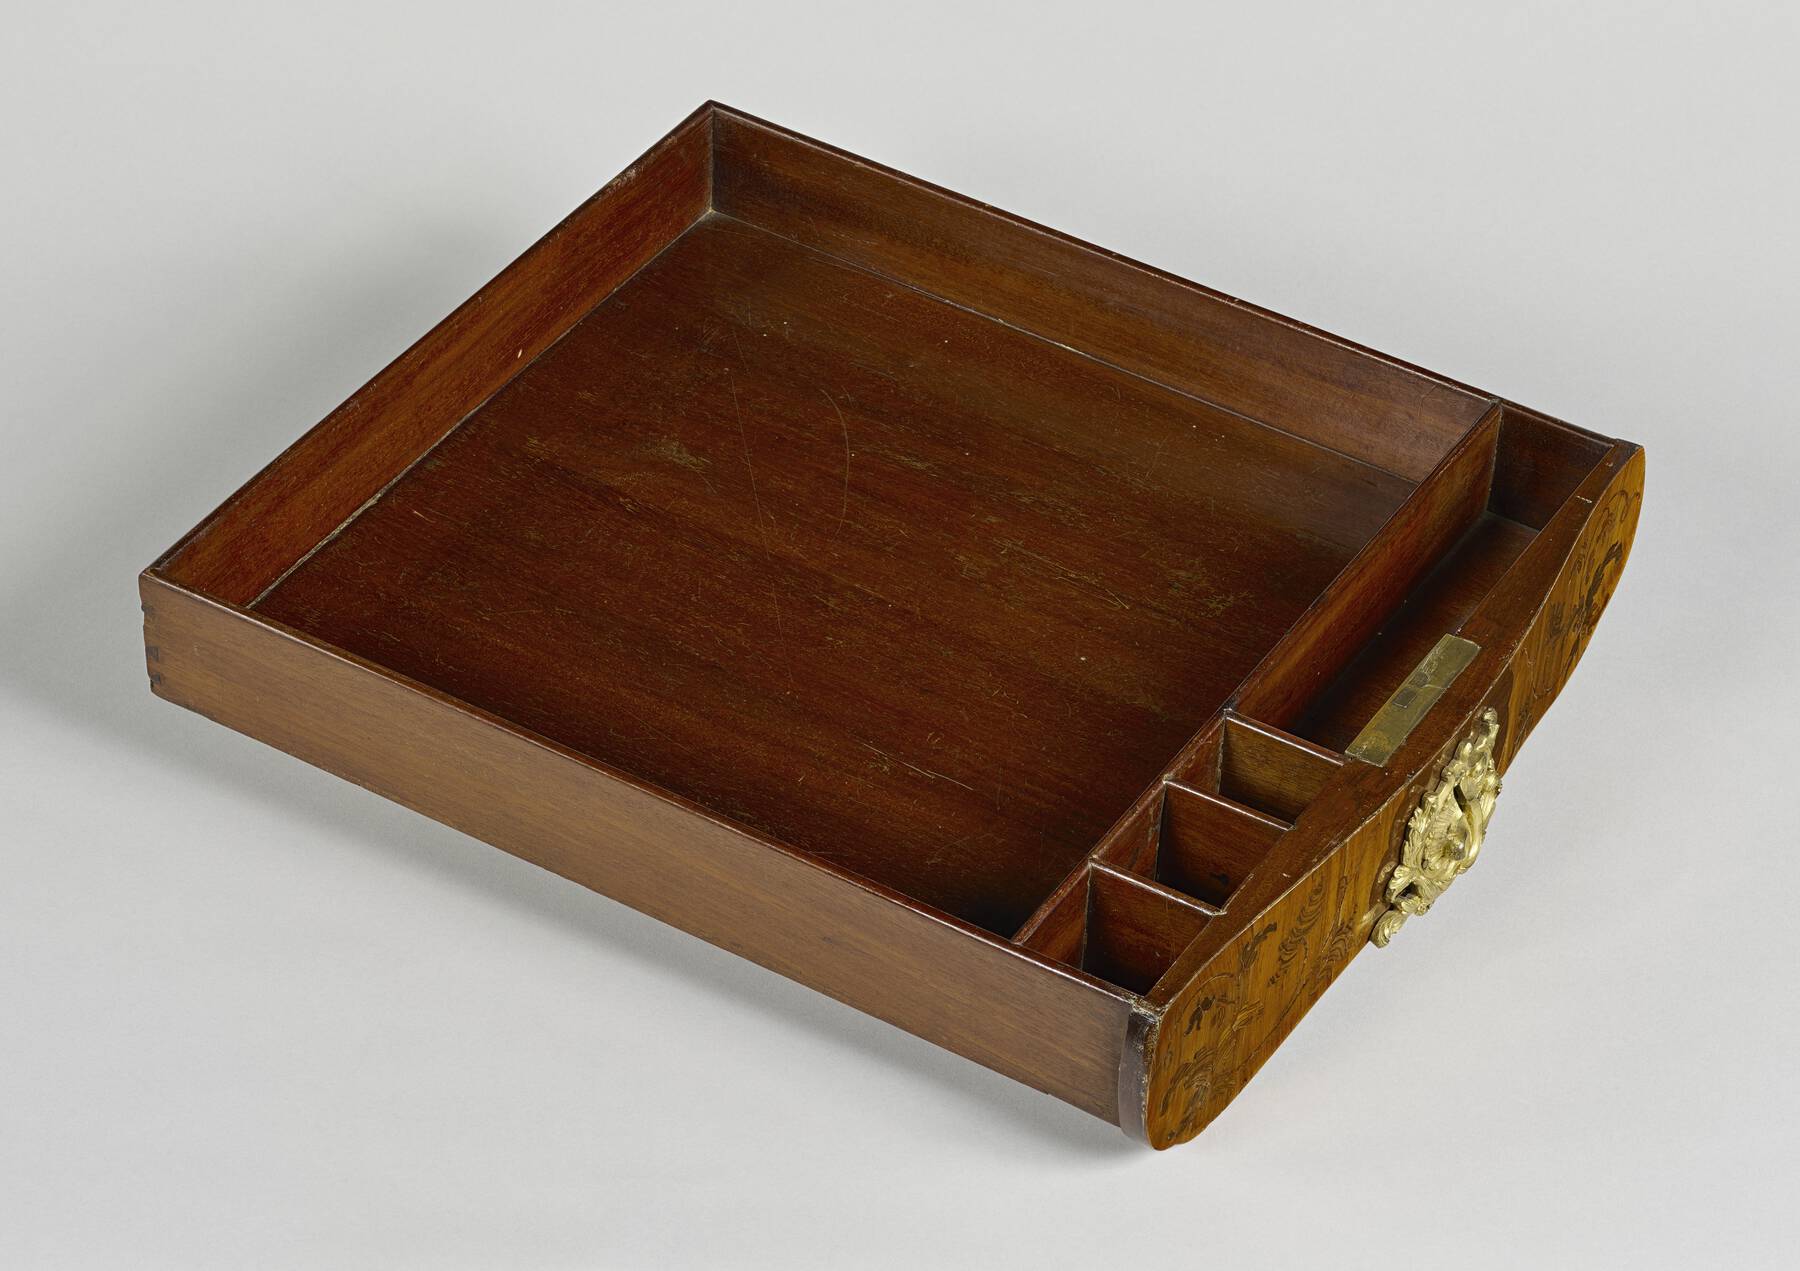 detail of one of the inner drawers, with one large square compartment in the back and four smaller compartments in the front: three small squares and one long rectangle